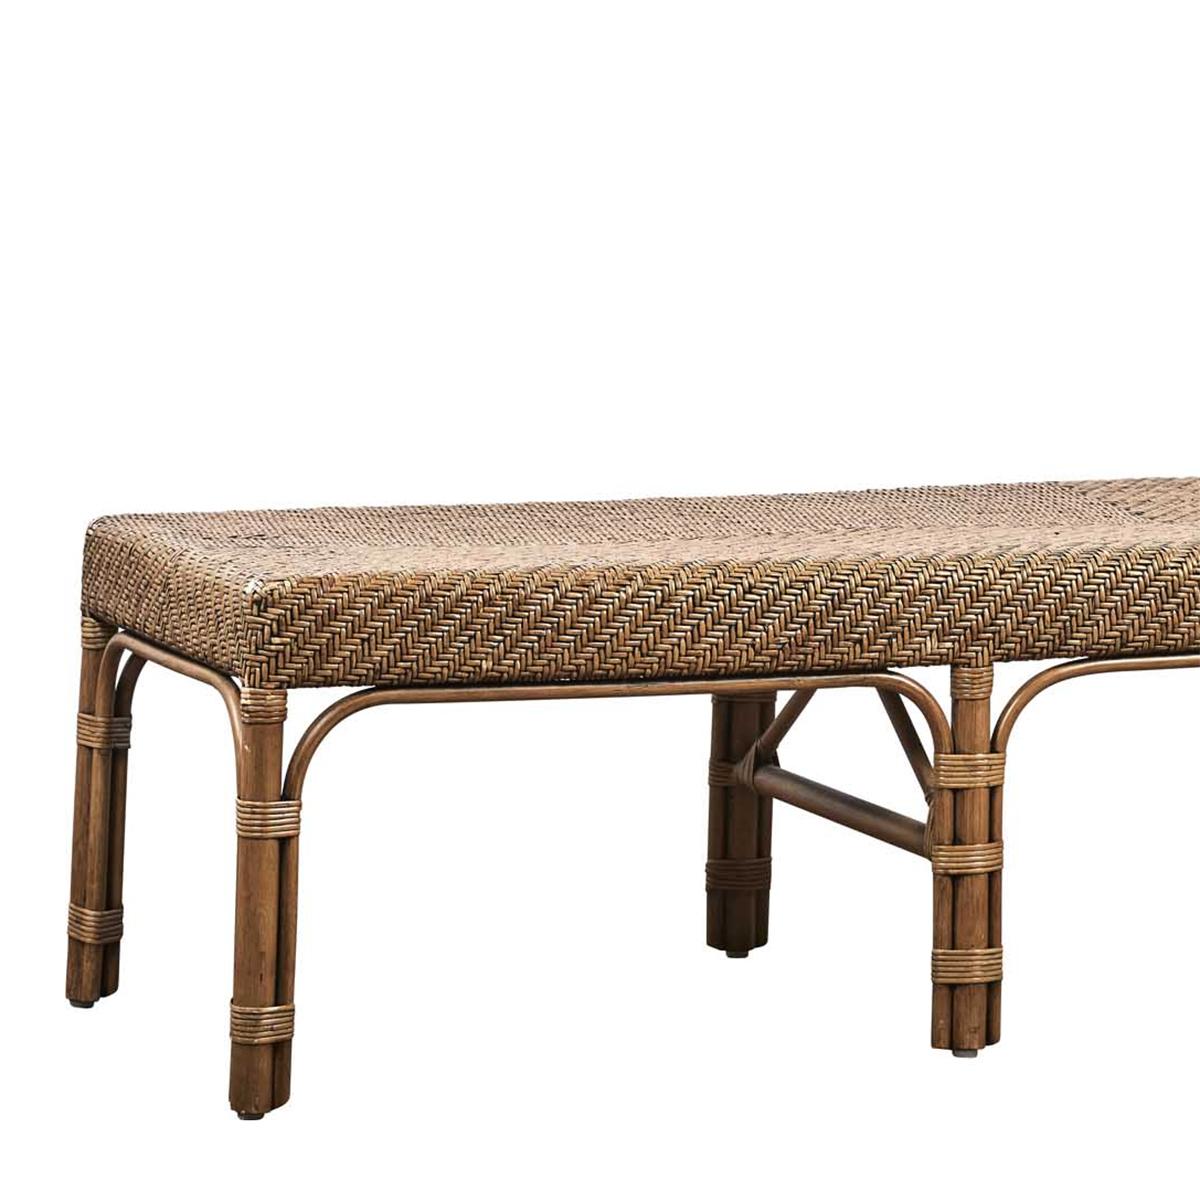 Bench Roda Rattan with all structure 
in handcrafted rattan.